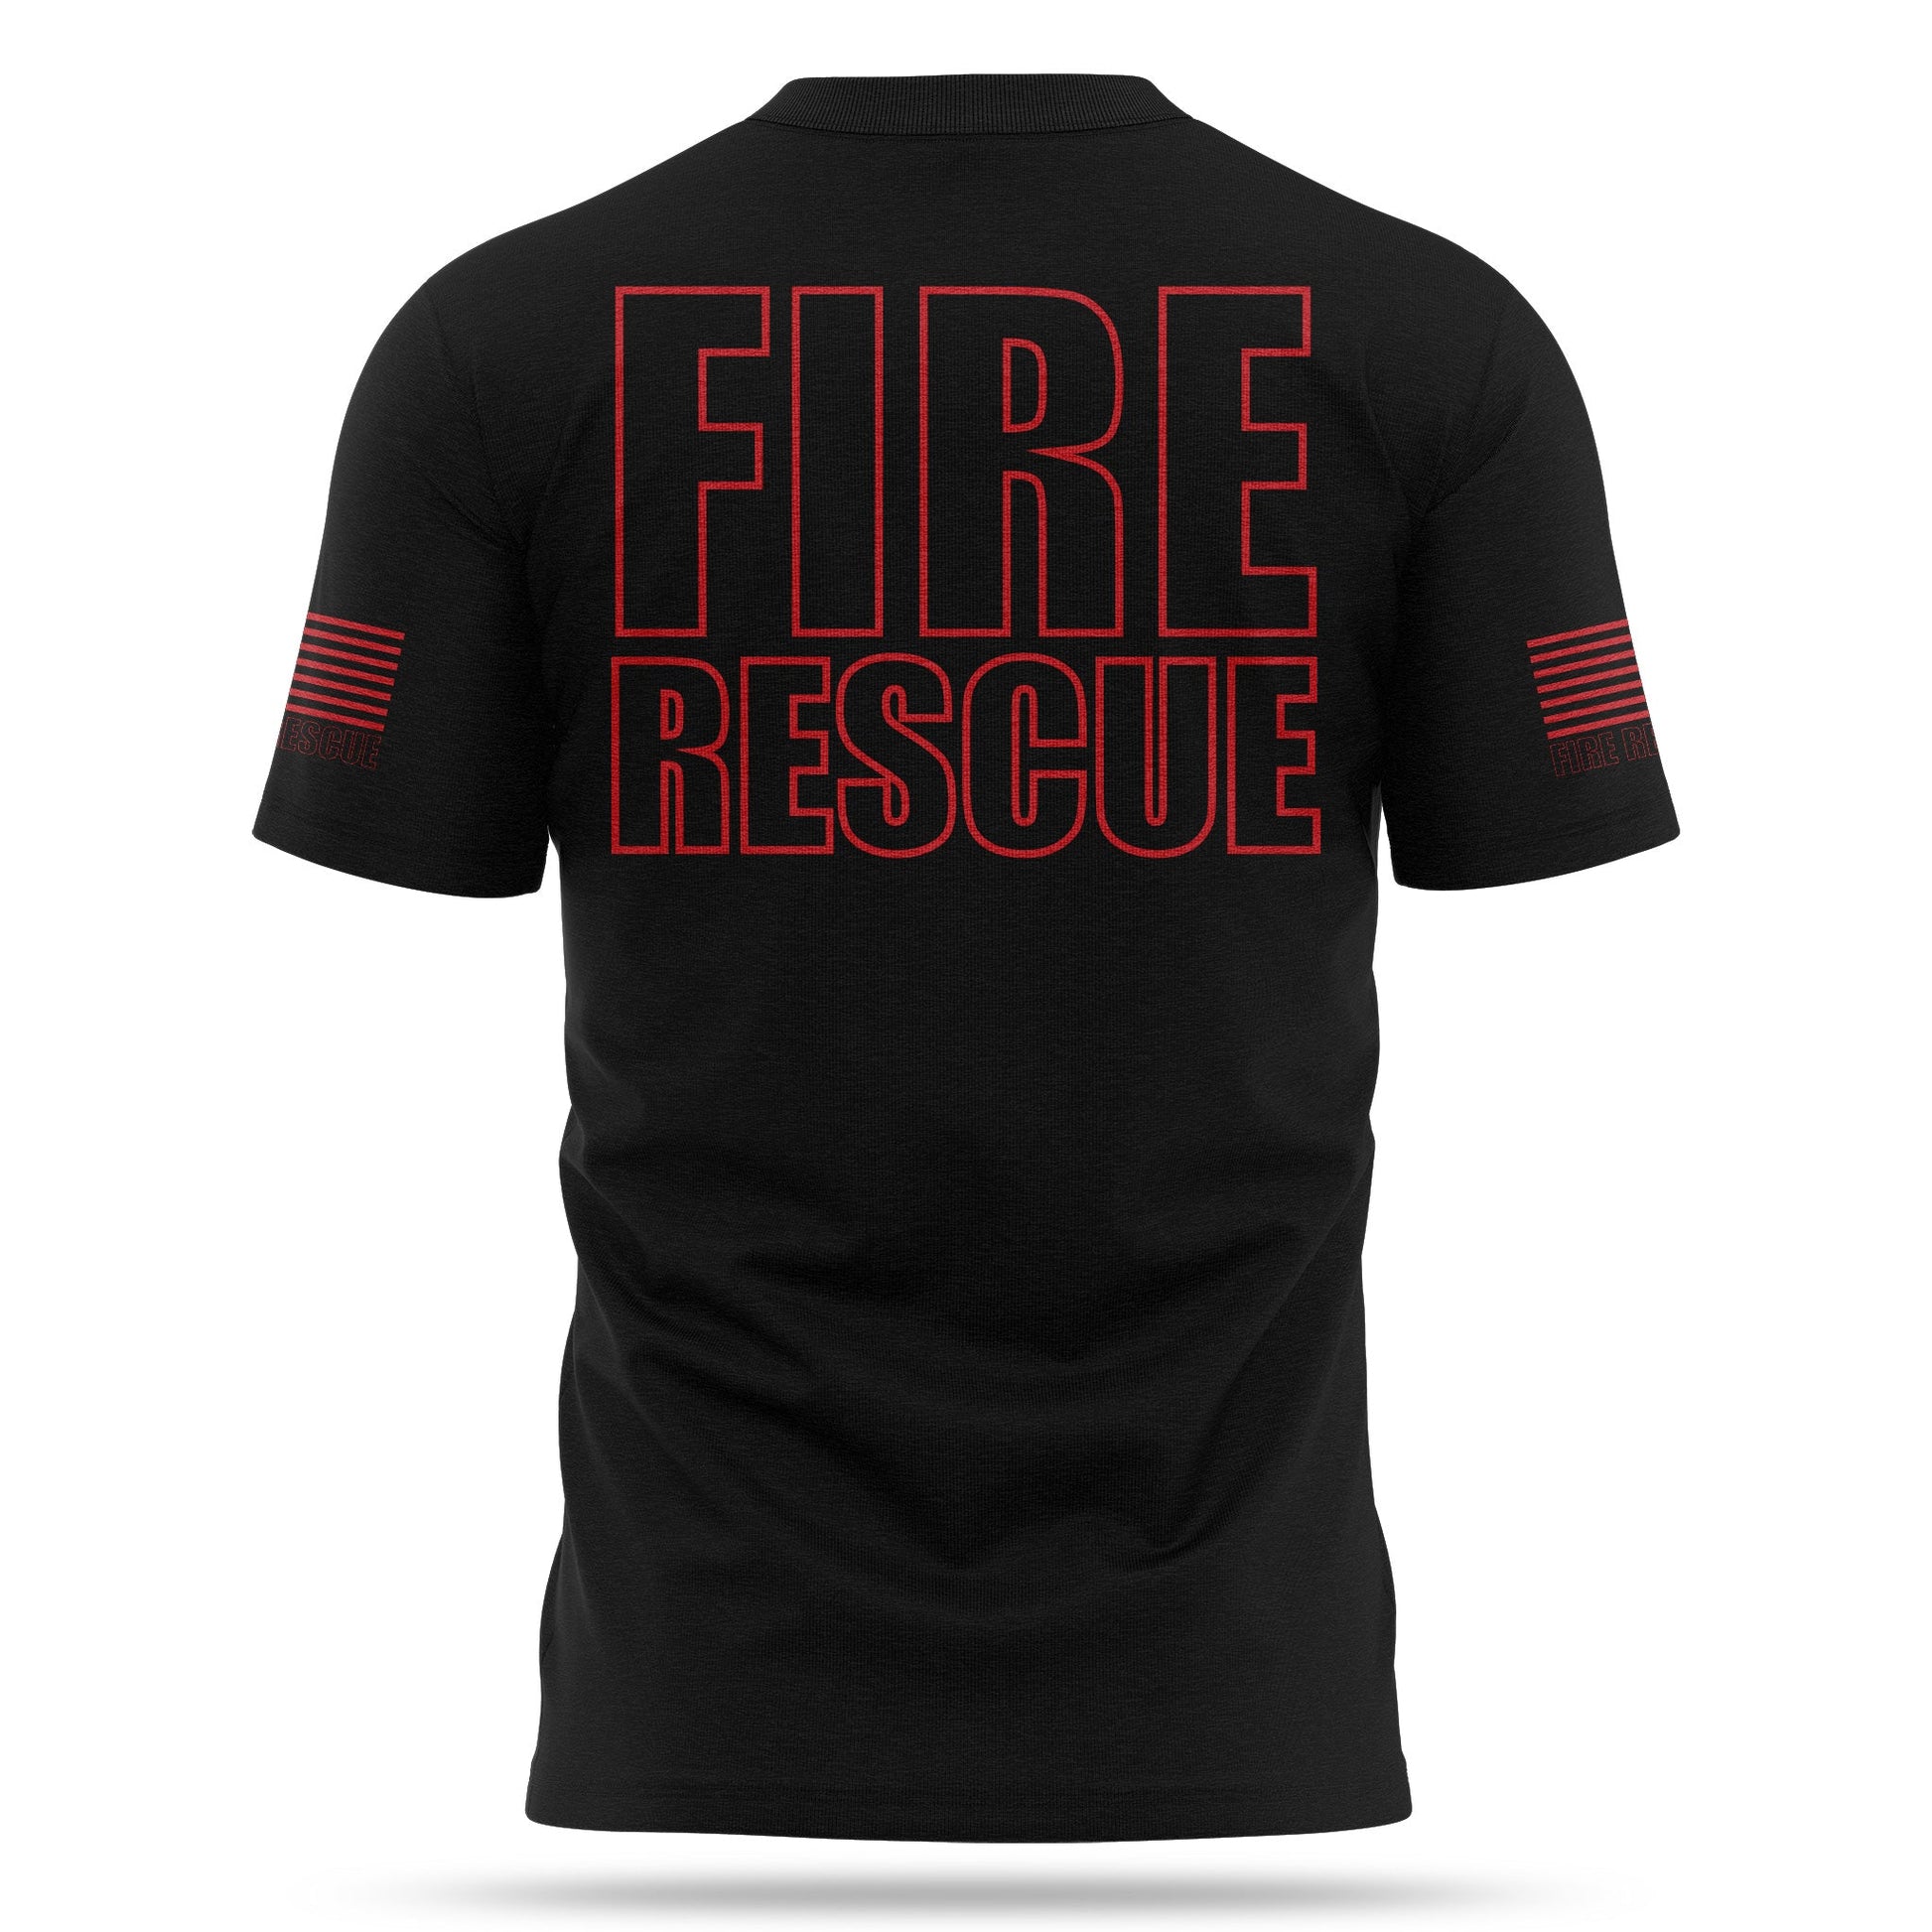 [FIRE RESCUE] Cotton Blend Shirt [BLK/RED]-13 Fifty Apparel